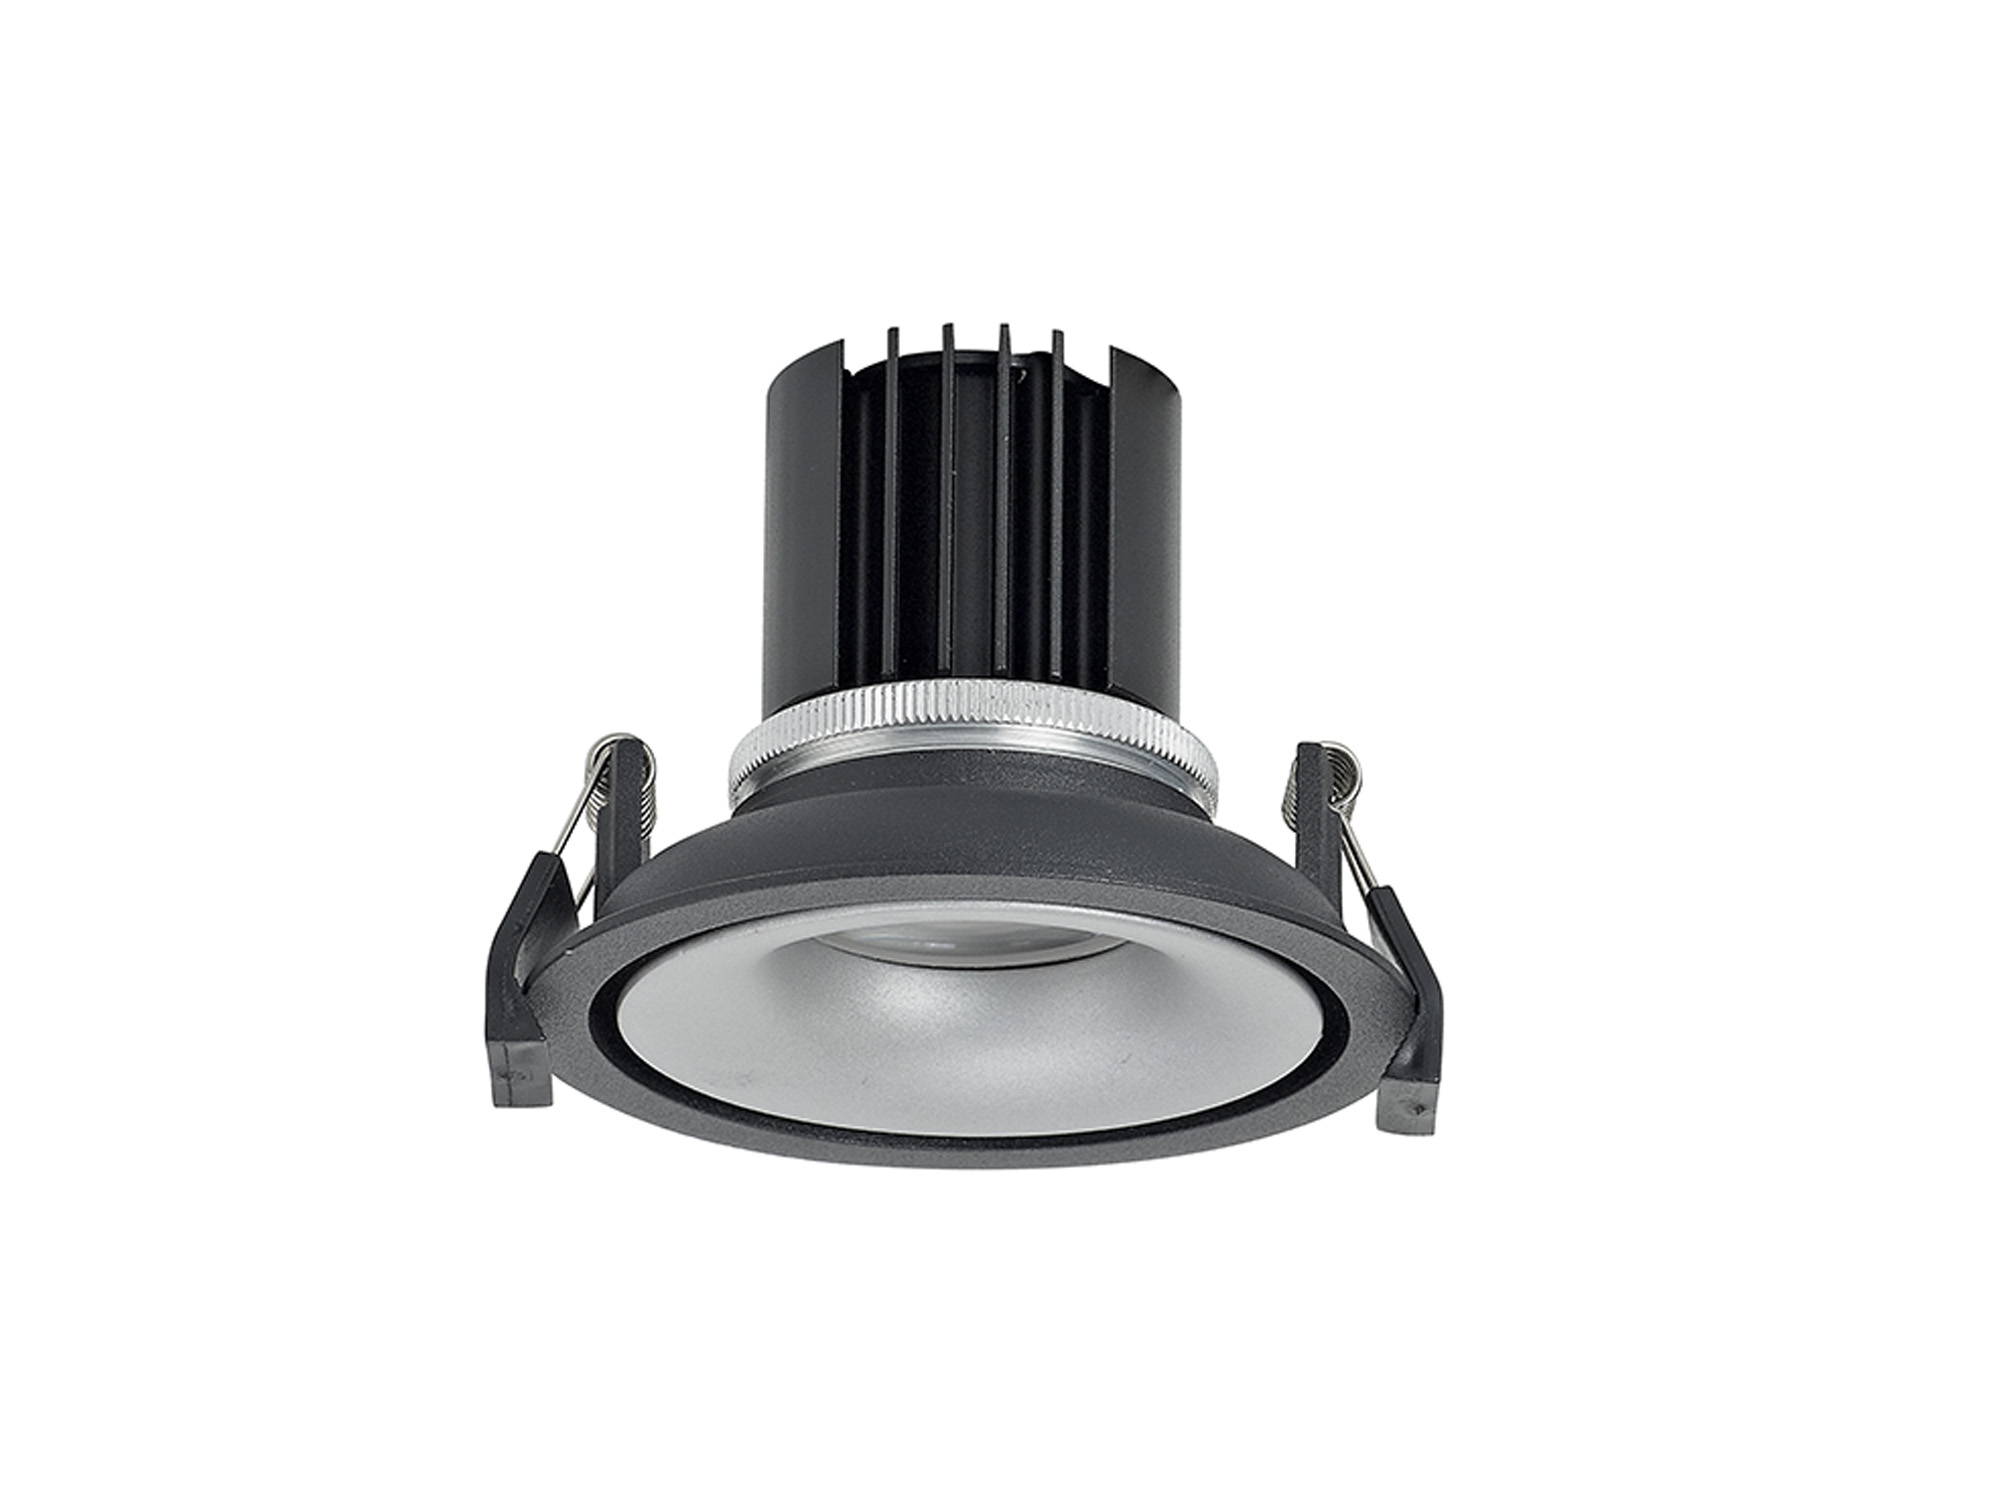 DM202060  Bolor 9 Tridonic Powered 9W 2700K 770lm 24° CRI>90 LED Engine Black/Silver Fixed Recessed Spotlight, IP20